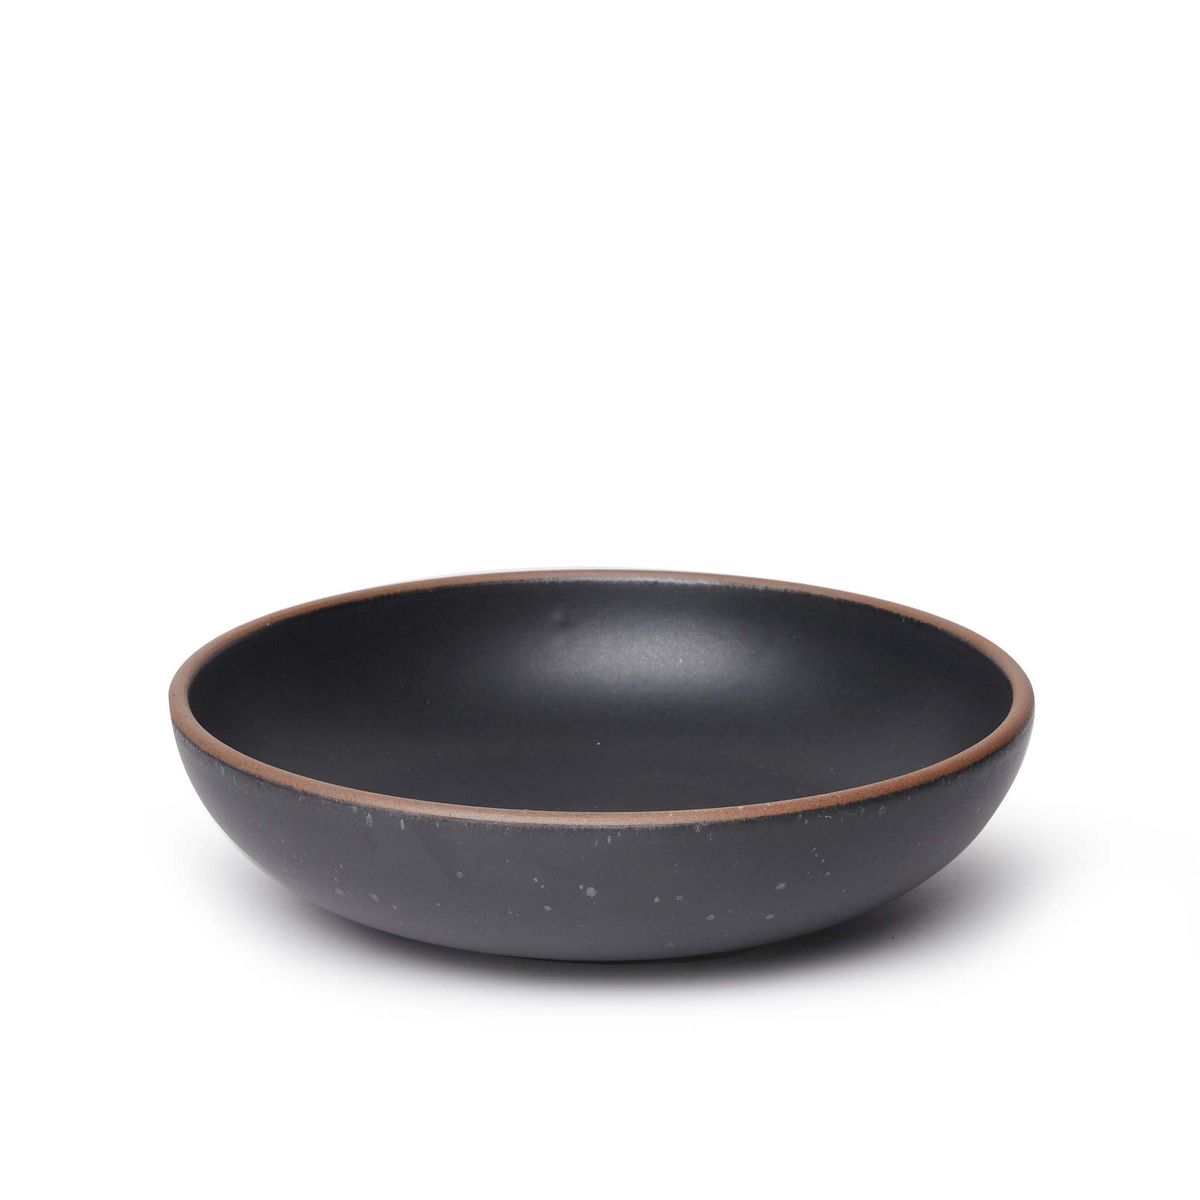 A large shallow serving ceramic bowl in a graphite black color featuring iron speckles and an unglazed rim